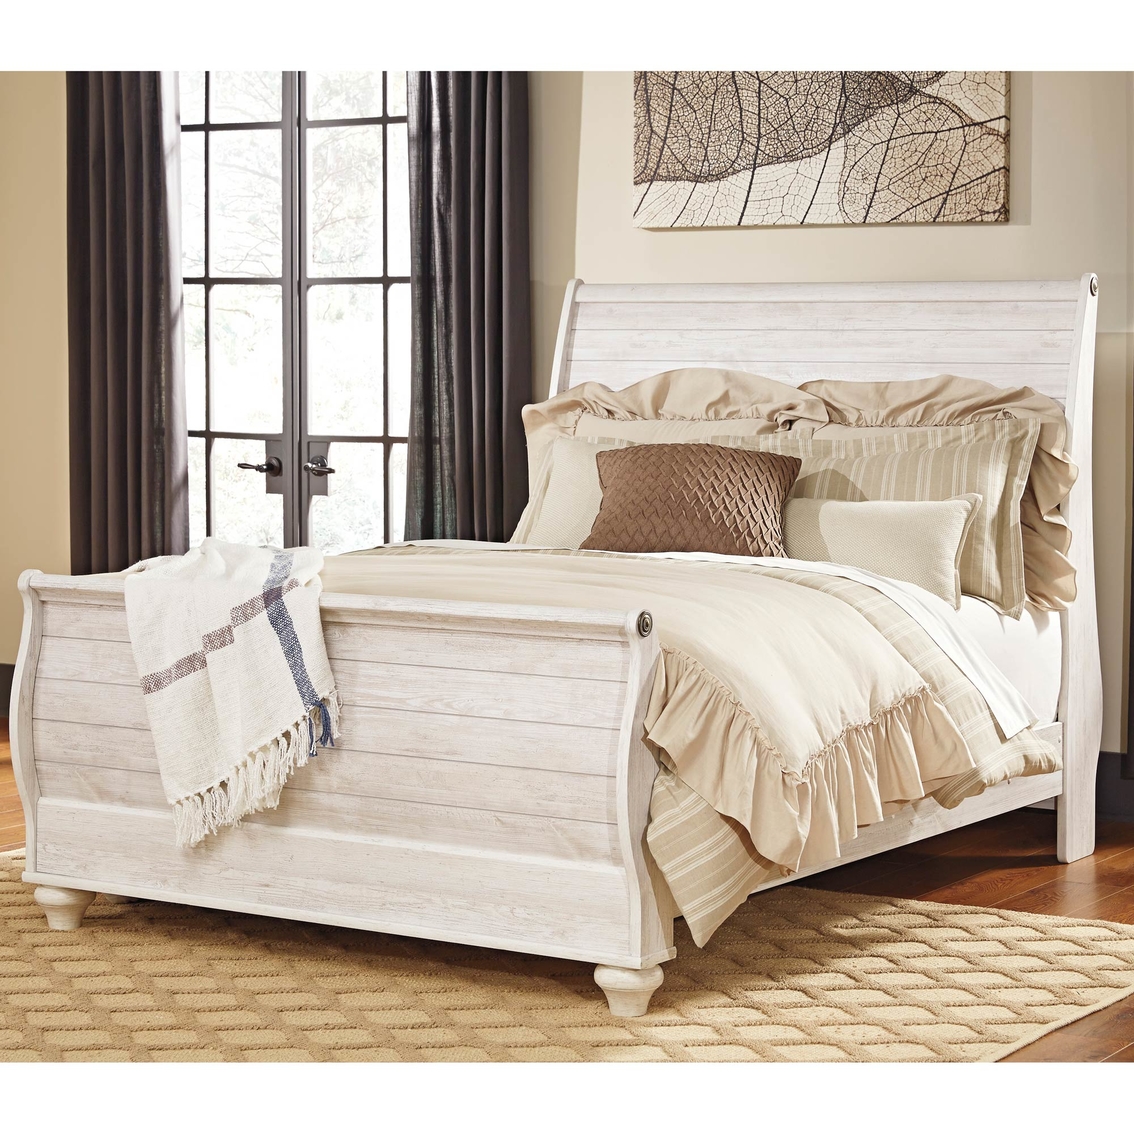 Willowton Sleigh Bed 5 pc. Set - Image 2 of 4